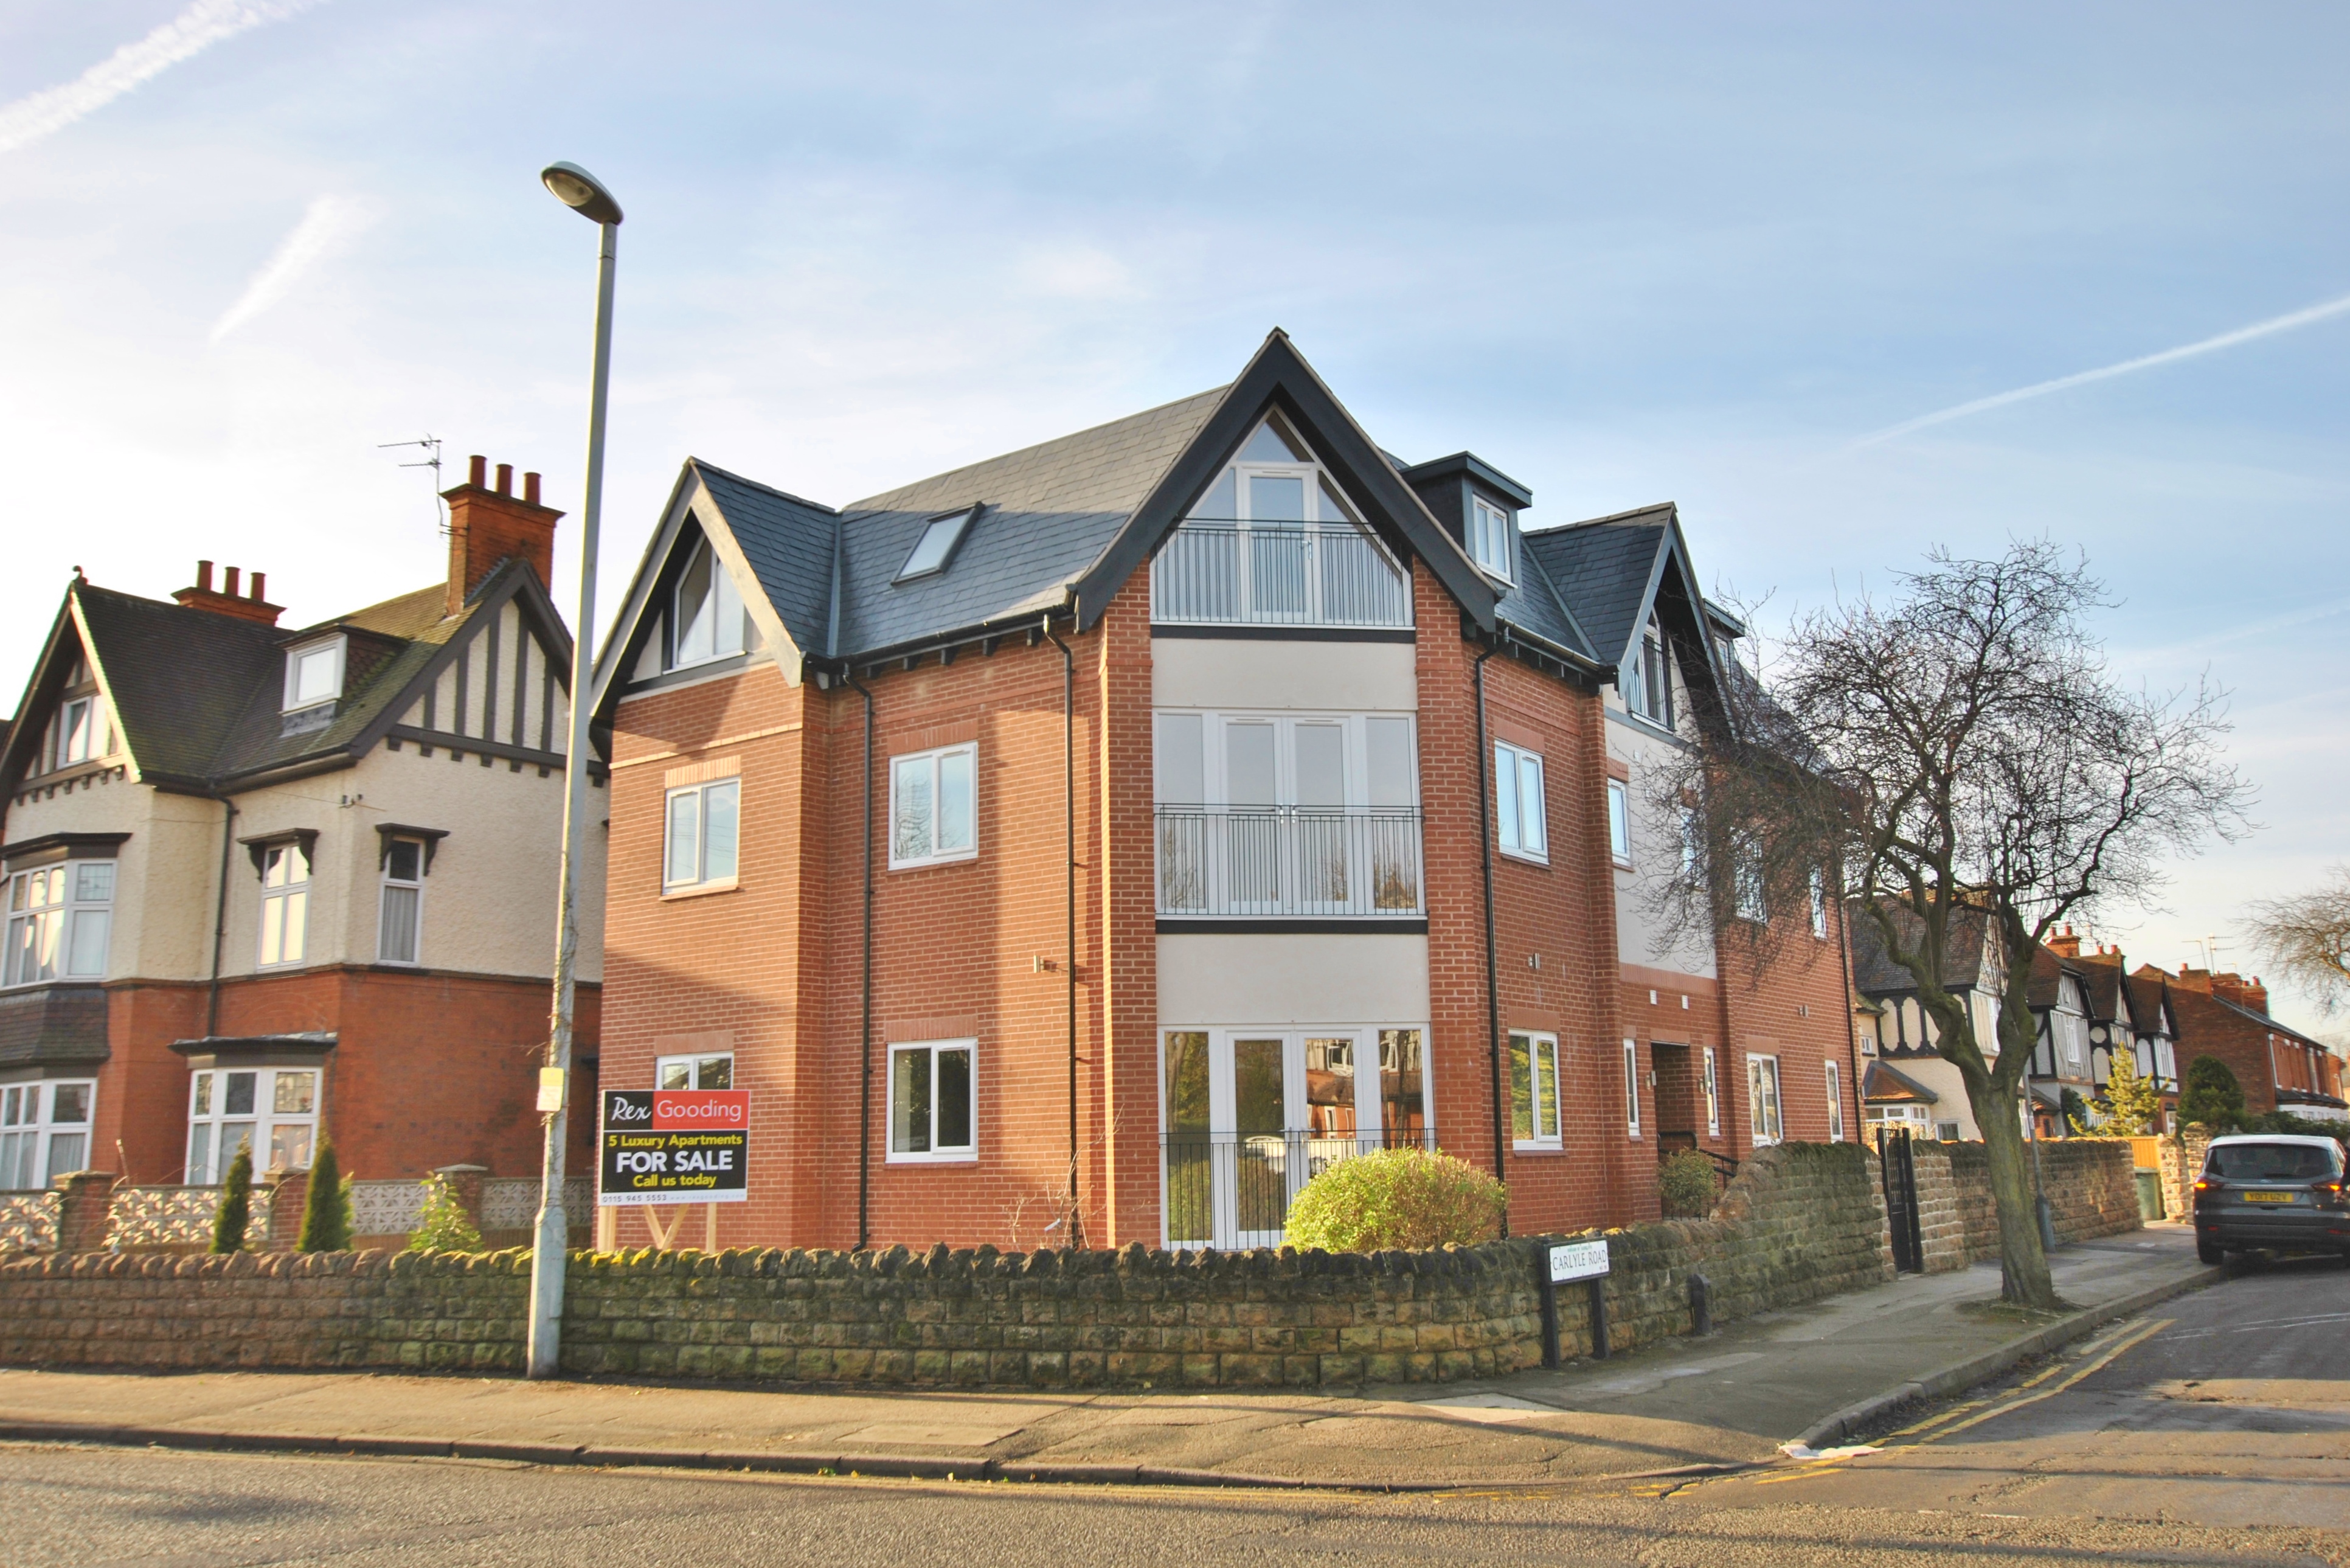 3 bed apartment to rent in Carlyle Road, West Bridgford - Property Image 1